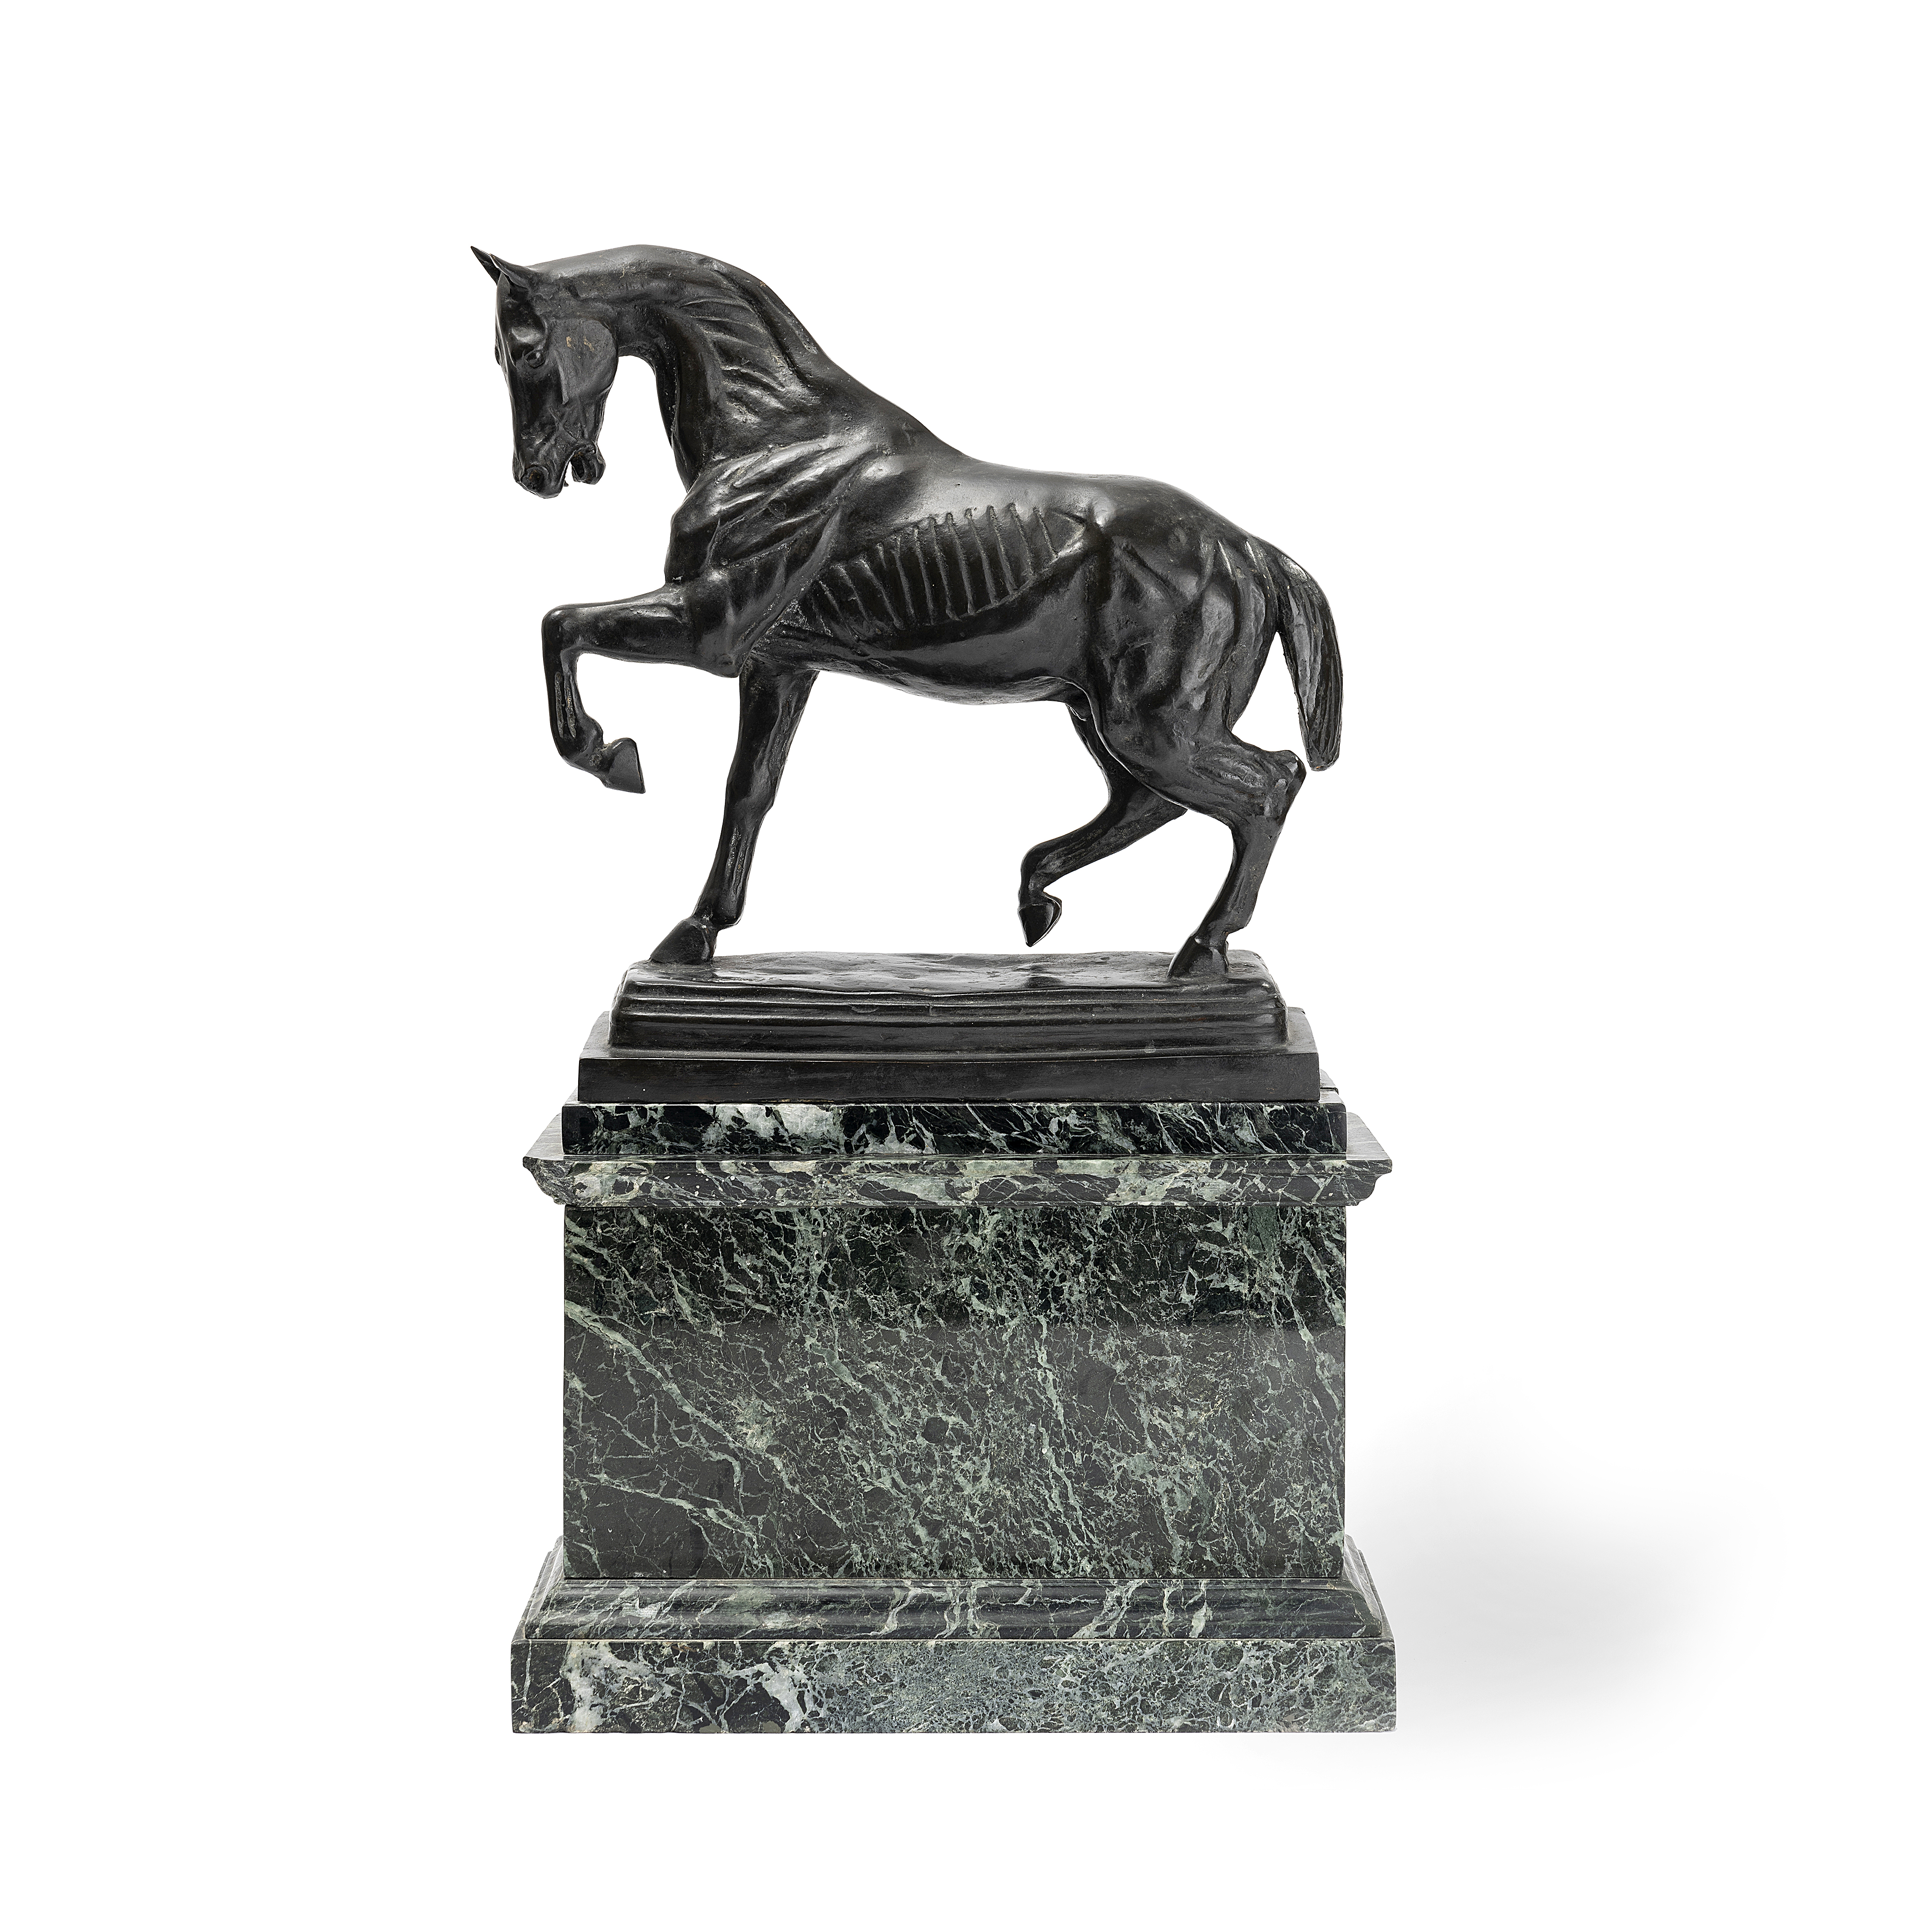 After Isidore Jules Bonheur (French, 1827-1901): A patinated bronze equestrian model of a rearin...